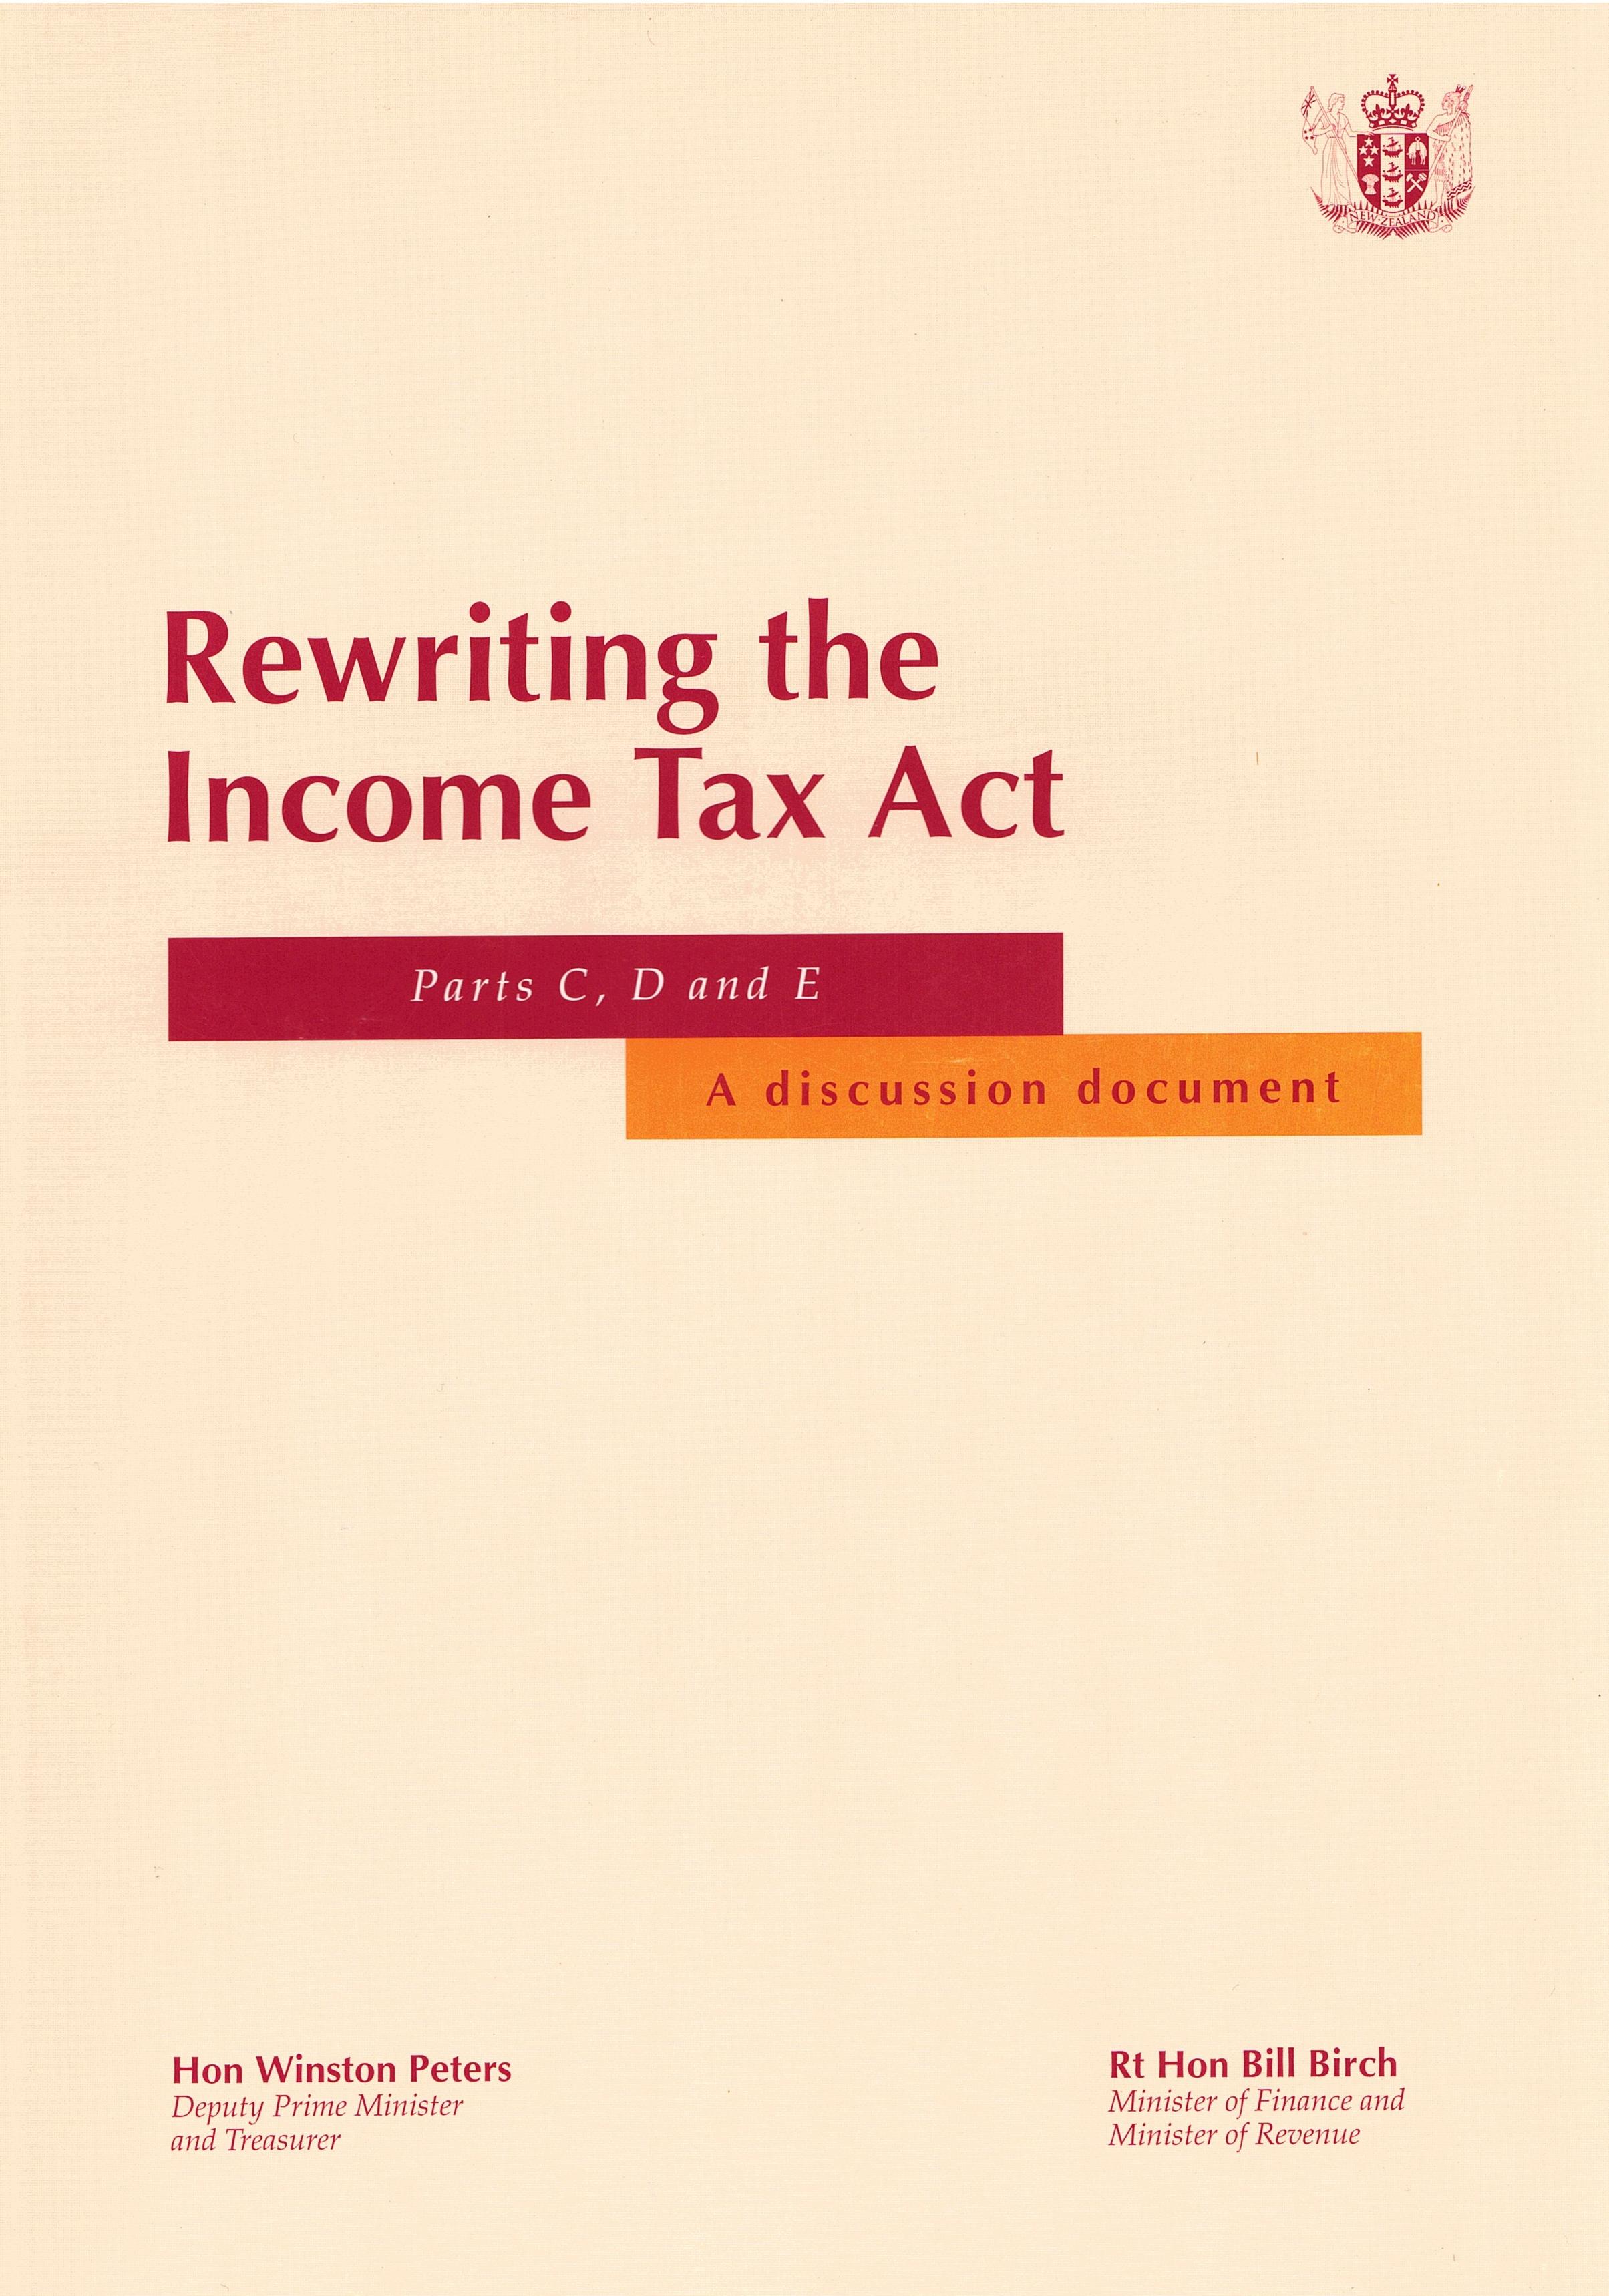 Cover page for publication. Title = Rewriting the Income Tax Act: Parts C, D and E (September 1997)